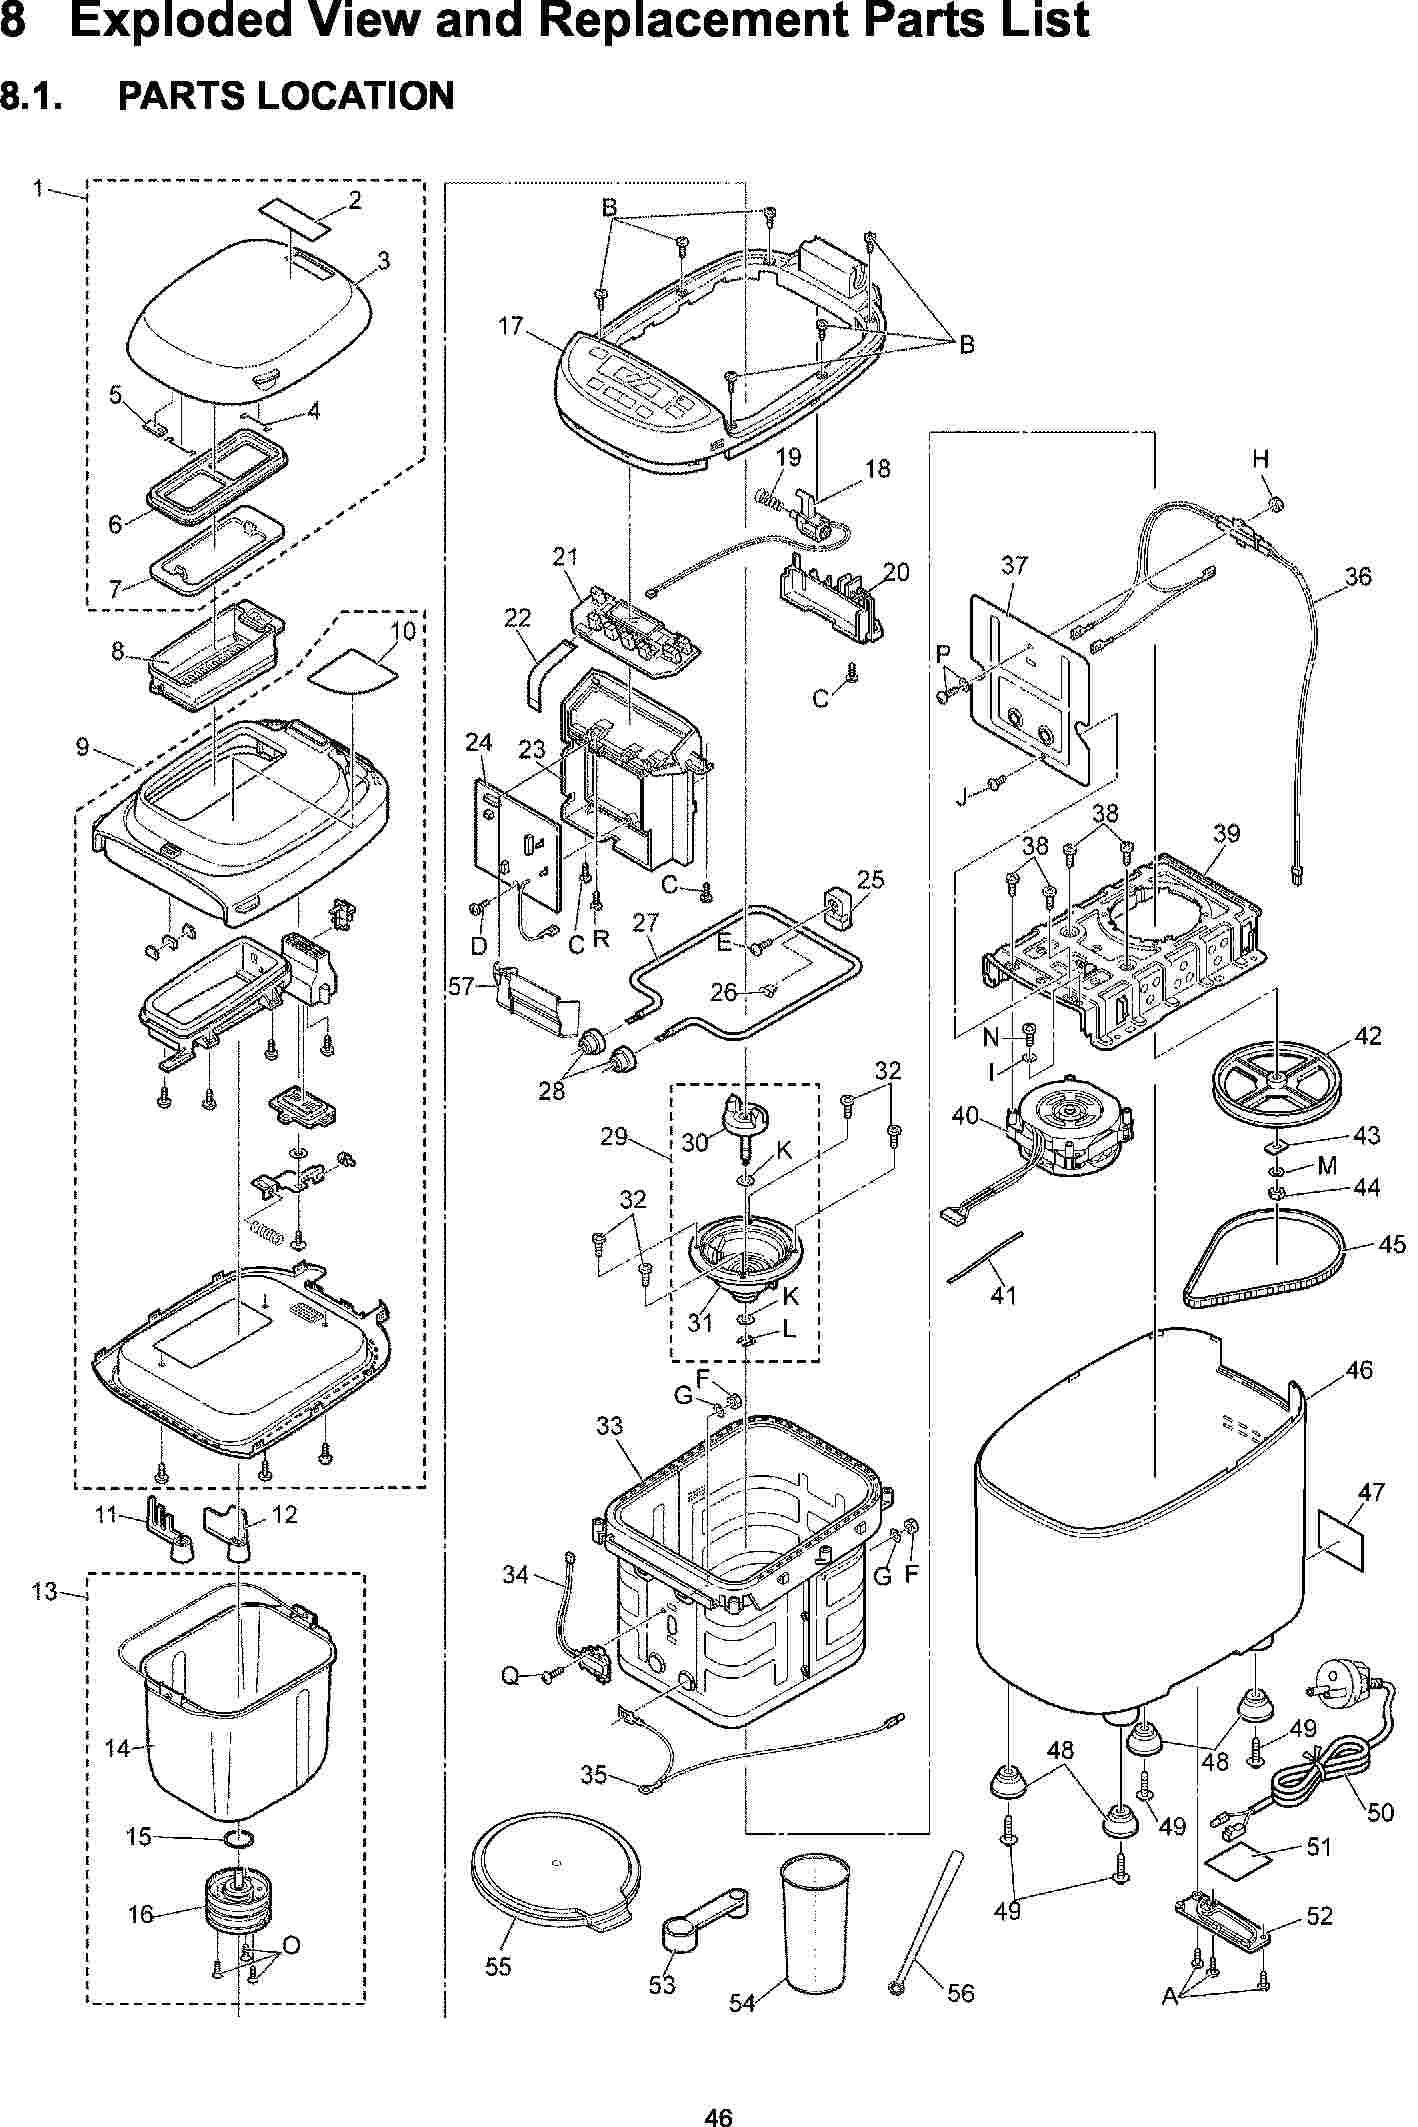 SD-2511: Exploded View